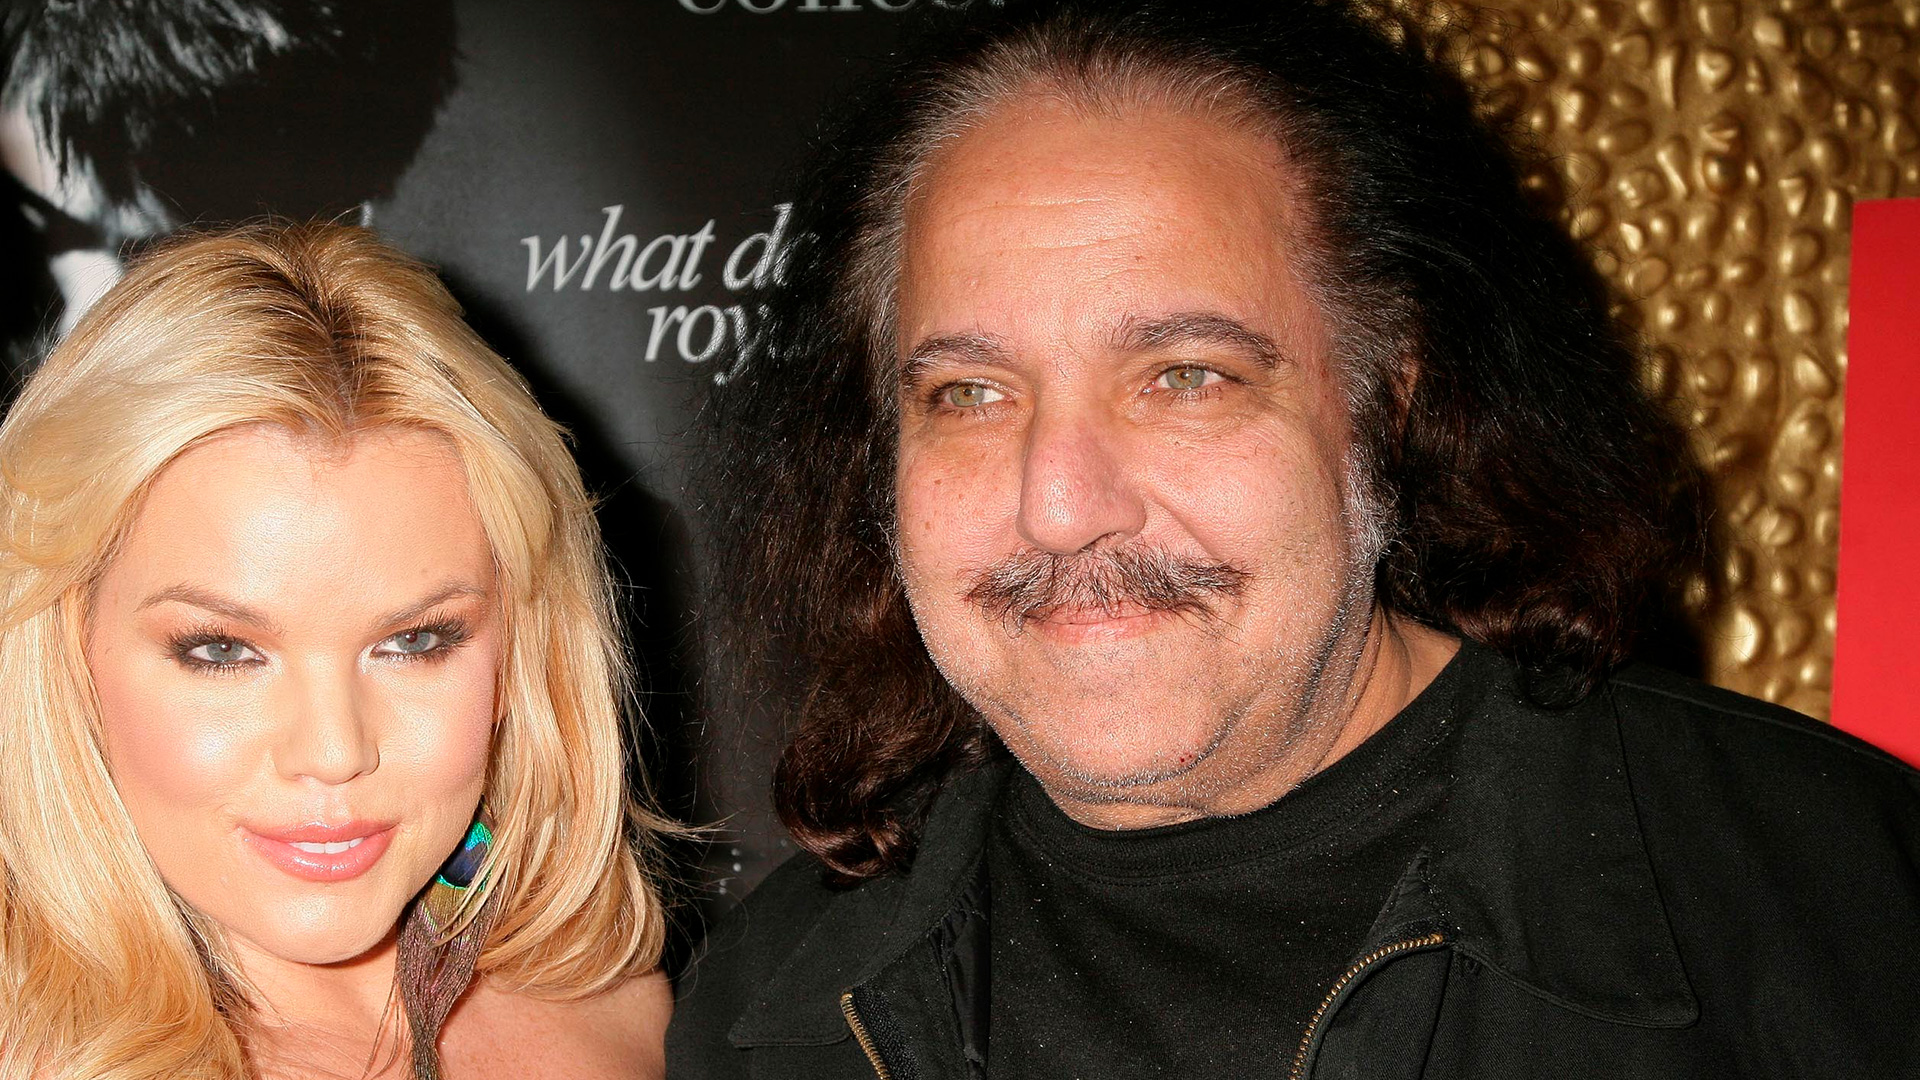 The porn actor Ron Jeremy was diagnosed with severe dementia and will not be prosecuted for abuse against 21 women.  (Shutterstock)